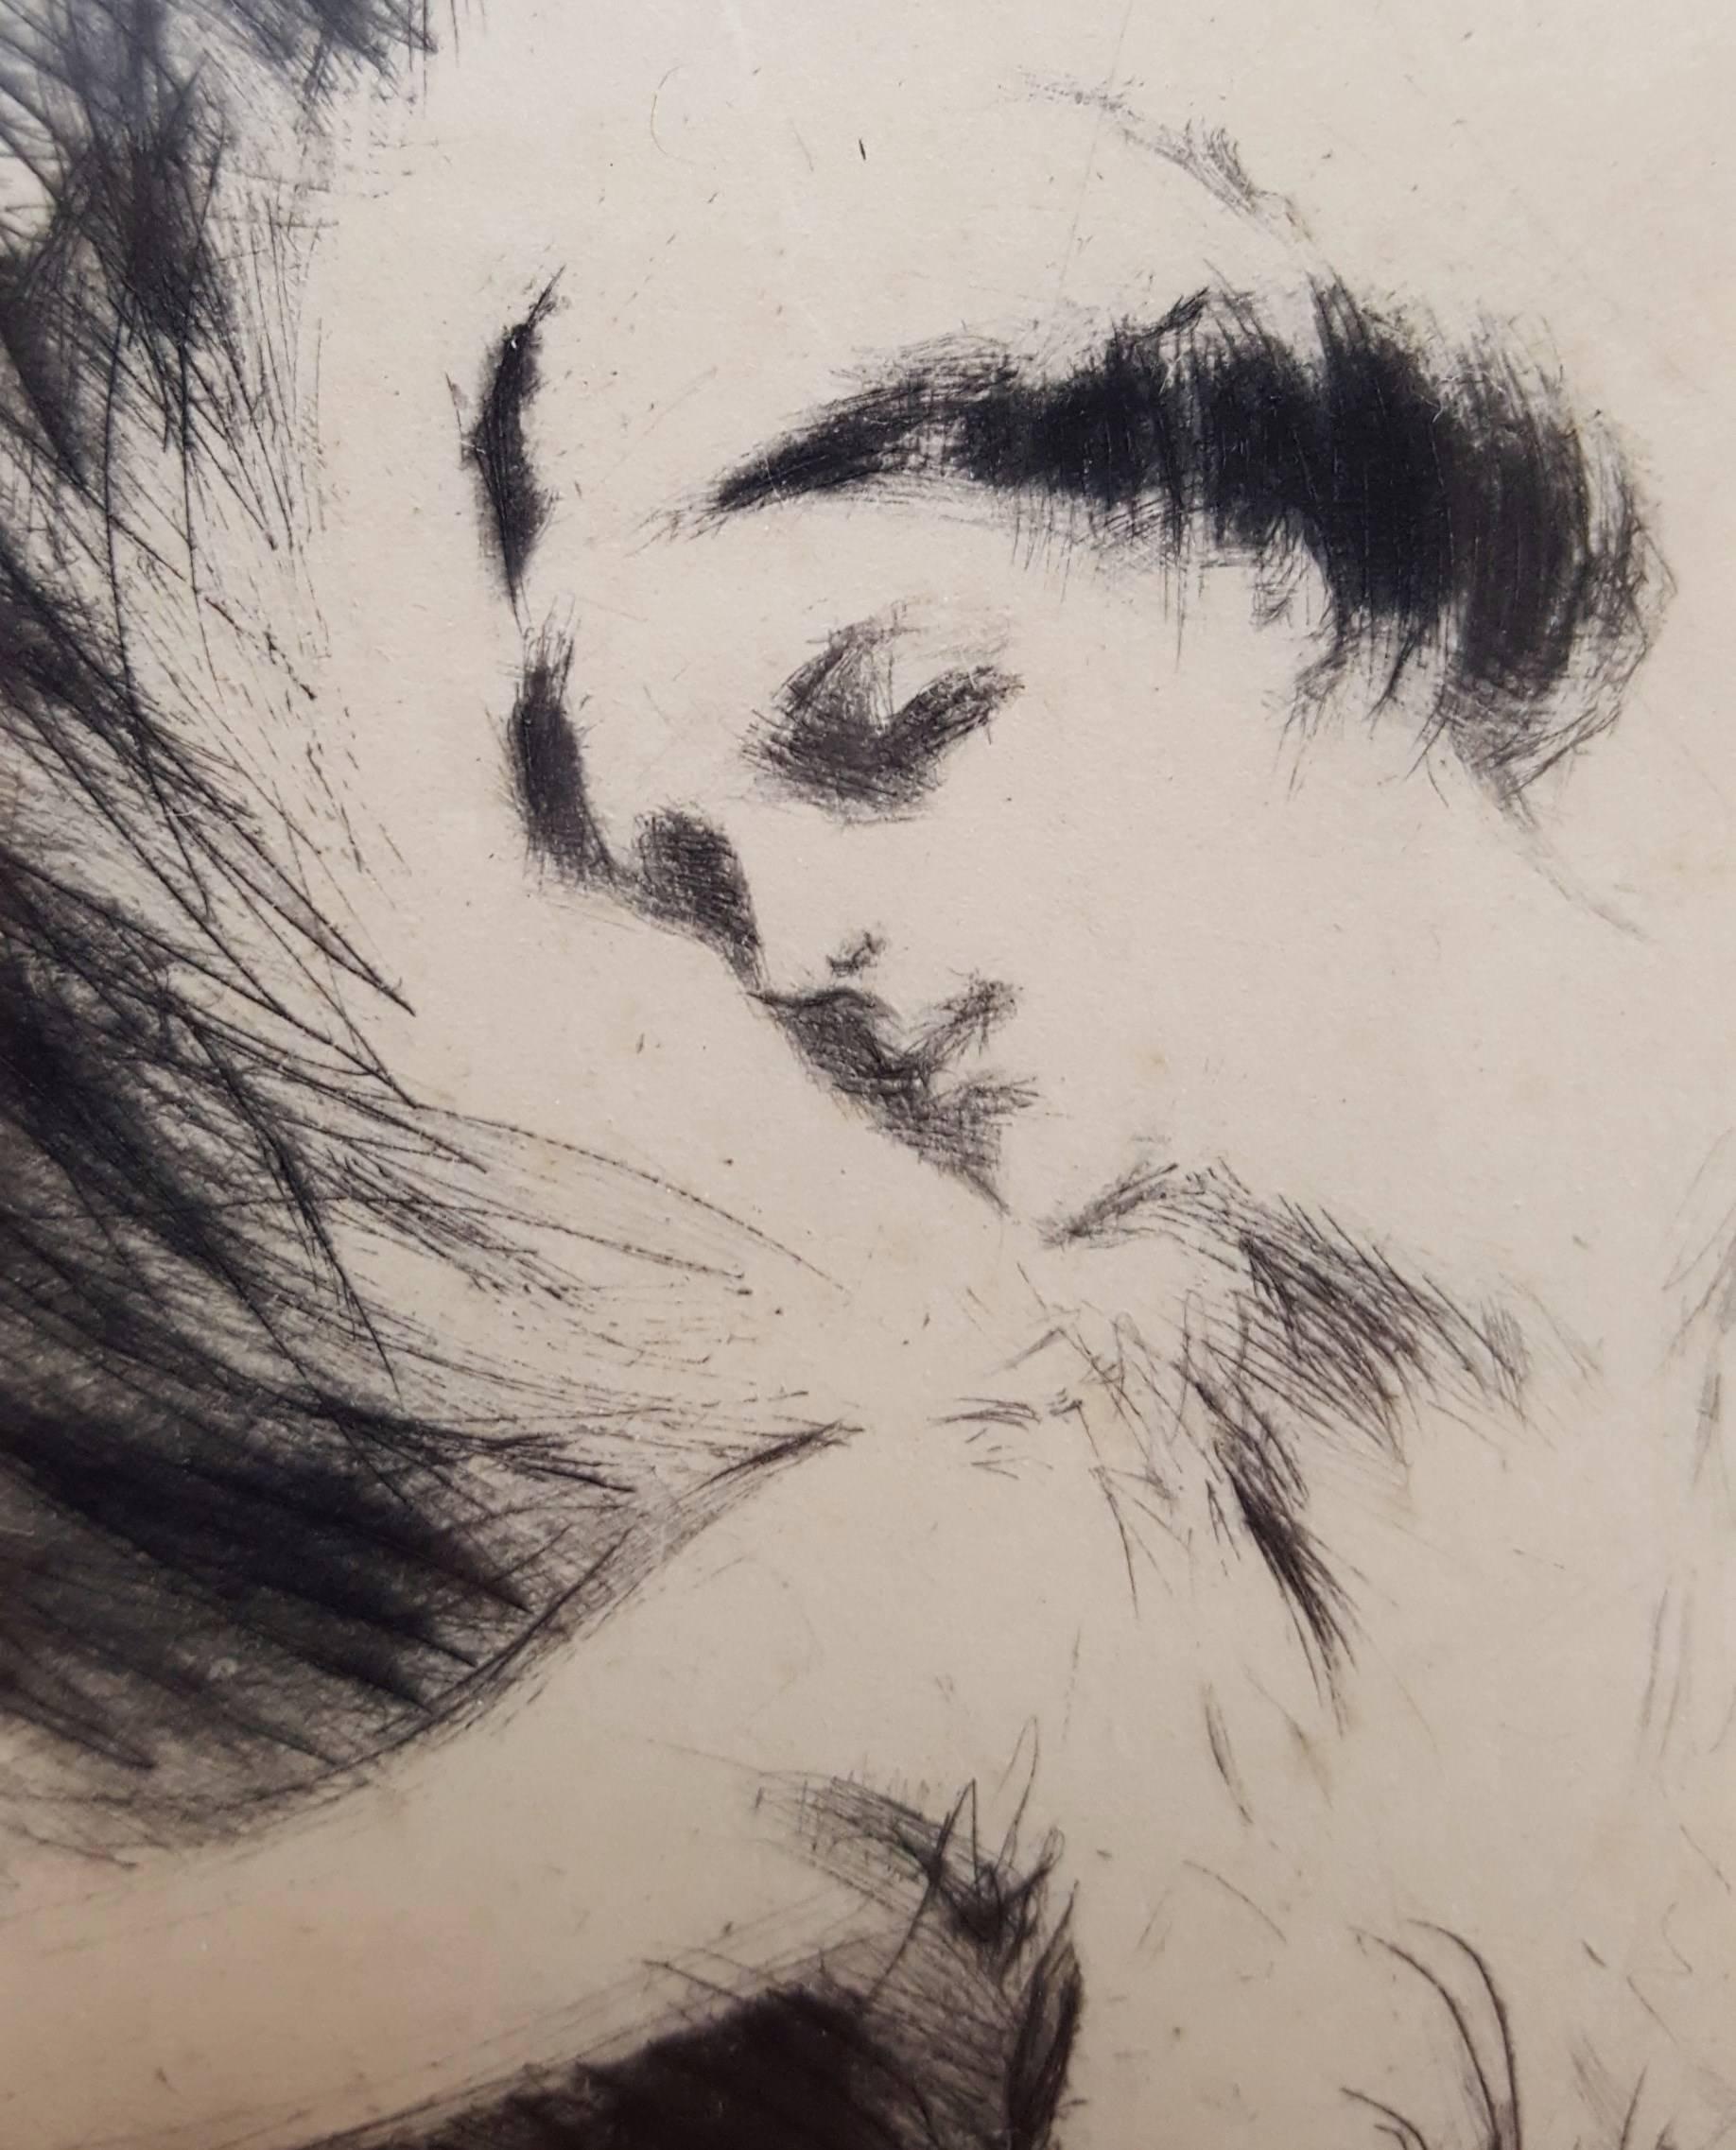 An original signed drypoint etching on cream Japan wove paper by American artist Troy Kinney (1871-1938) titled 